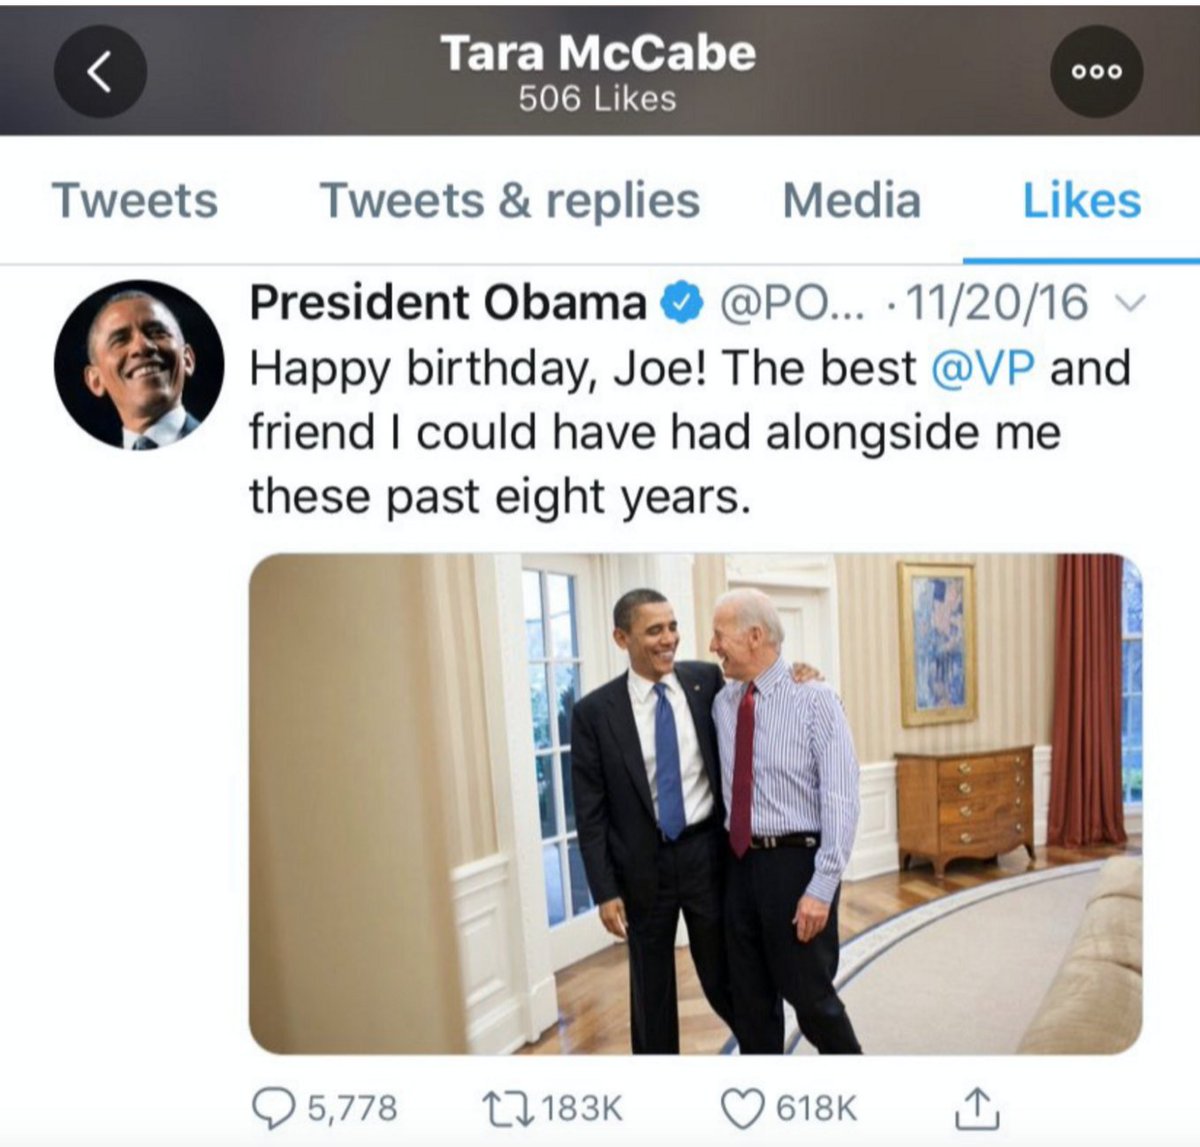 It's not just one time, but Tara Reade did it over and over again-- praising Joe Biden through multiple tweets, retweets, and likes in 2016 and 2017 (thread)